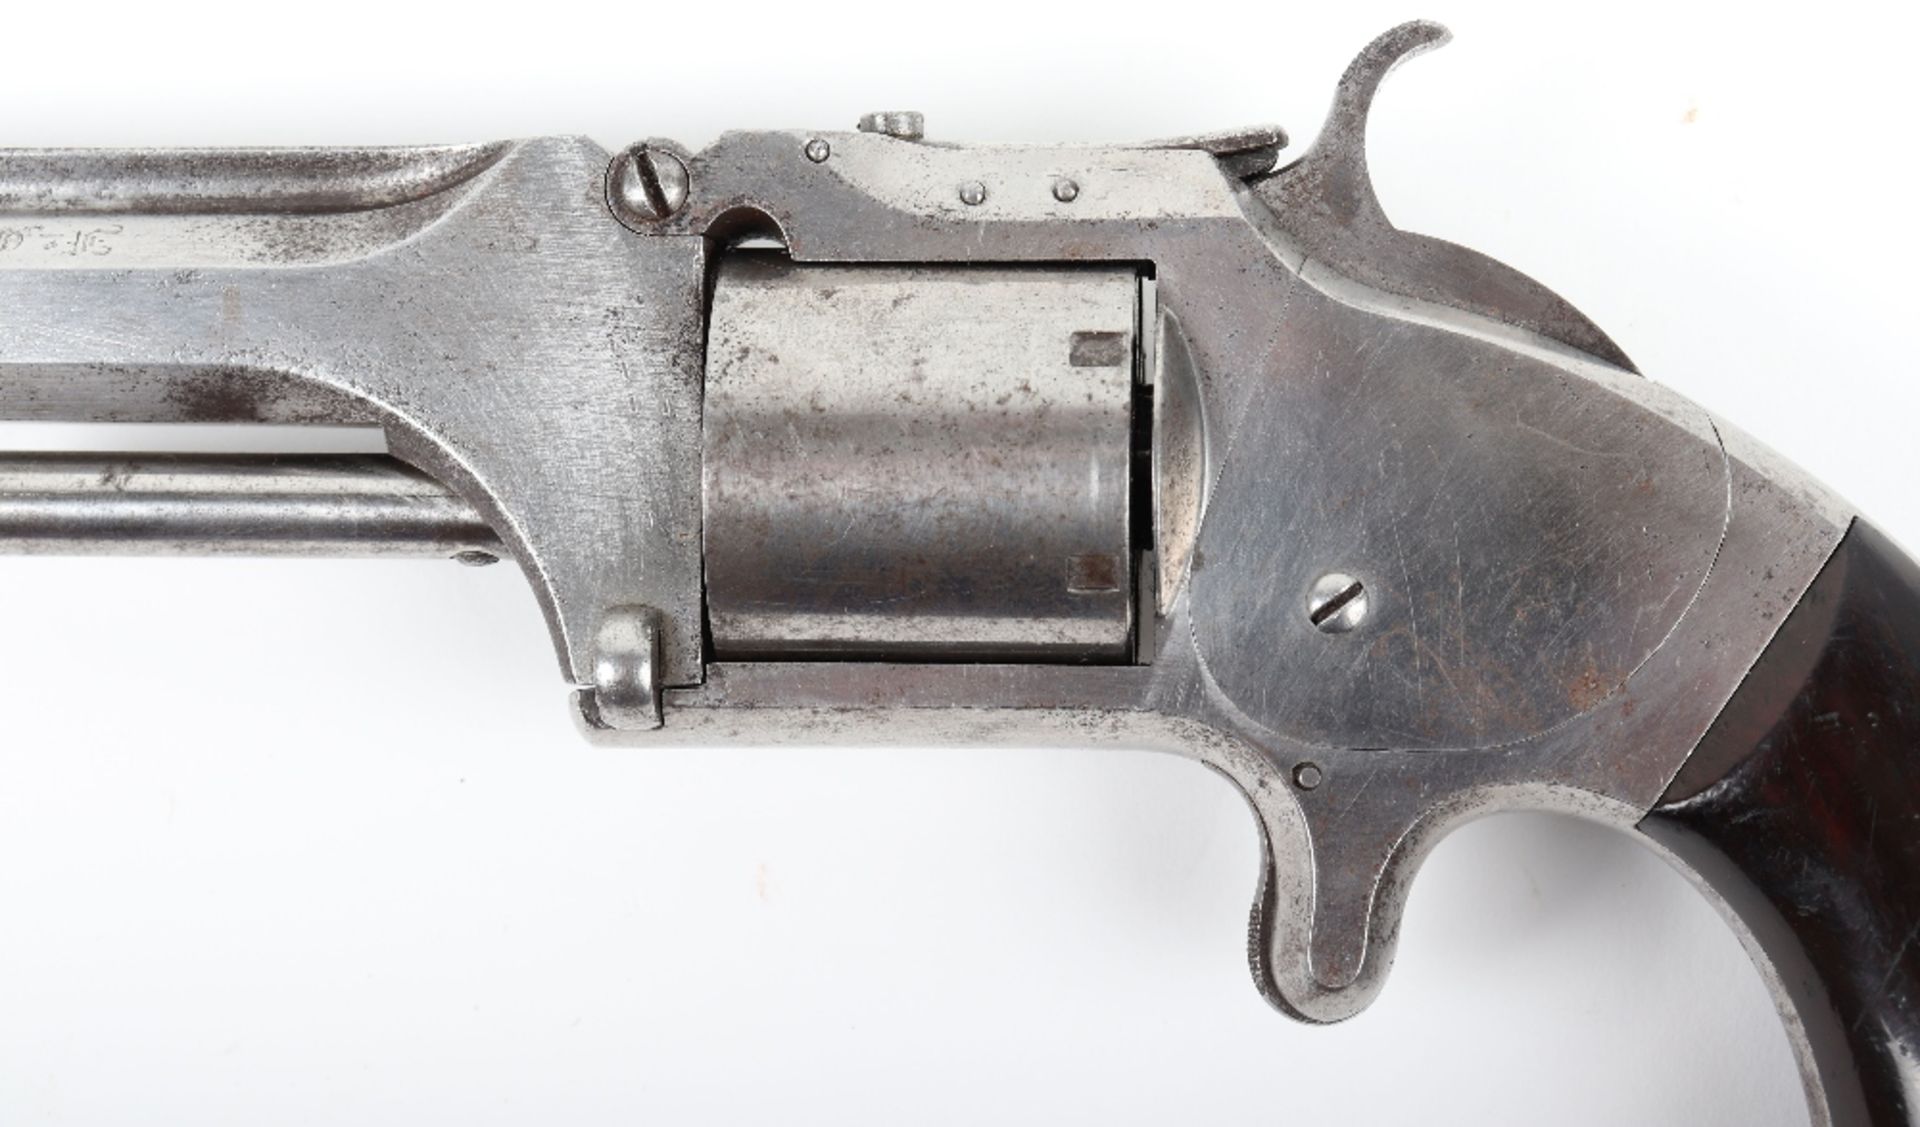 6 Shot .32” Rimfire Smith and Wesson Single Action Revolver No. 62099 Retailed in France - Image 7 of 9